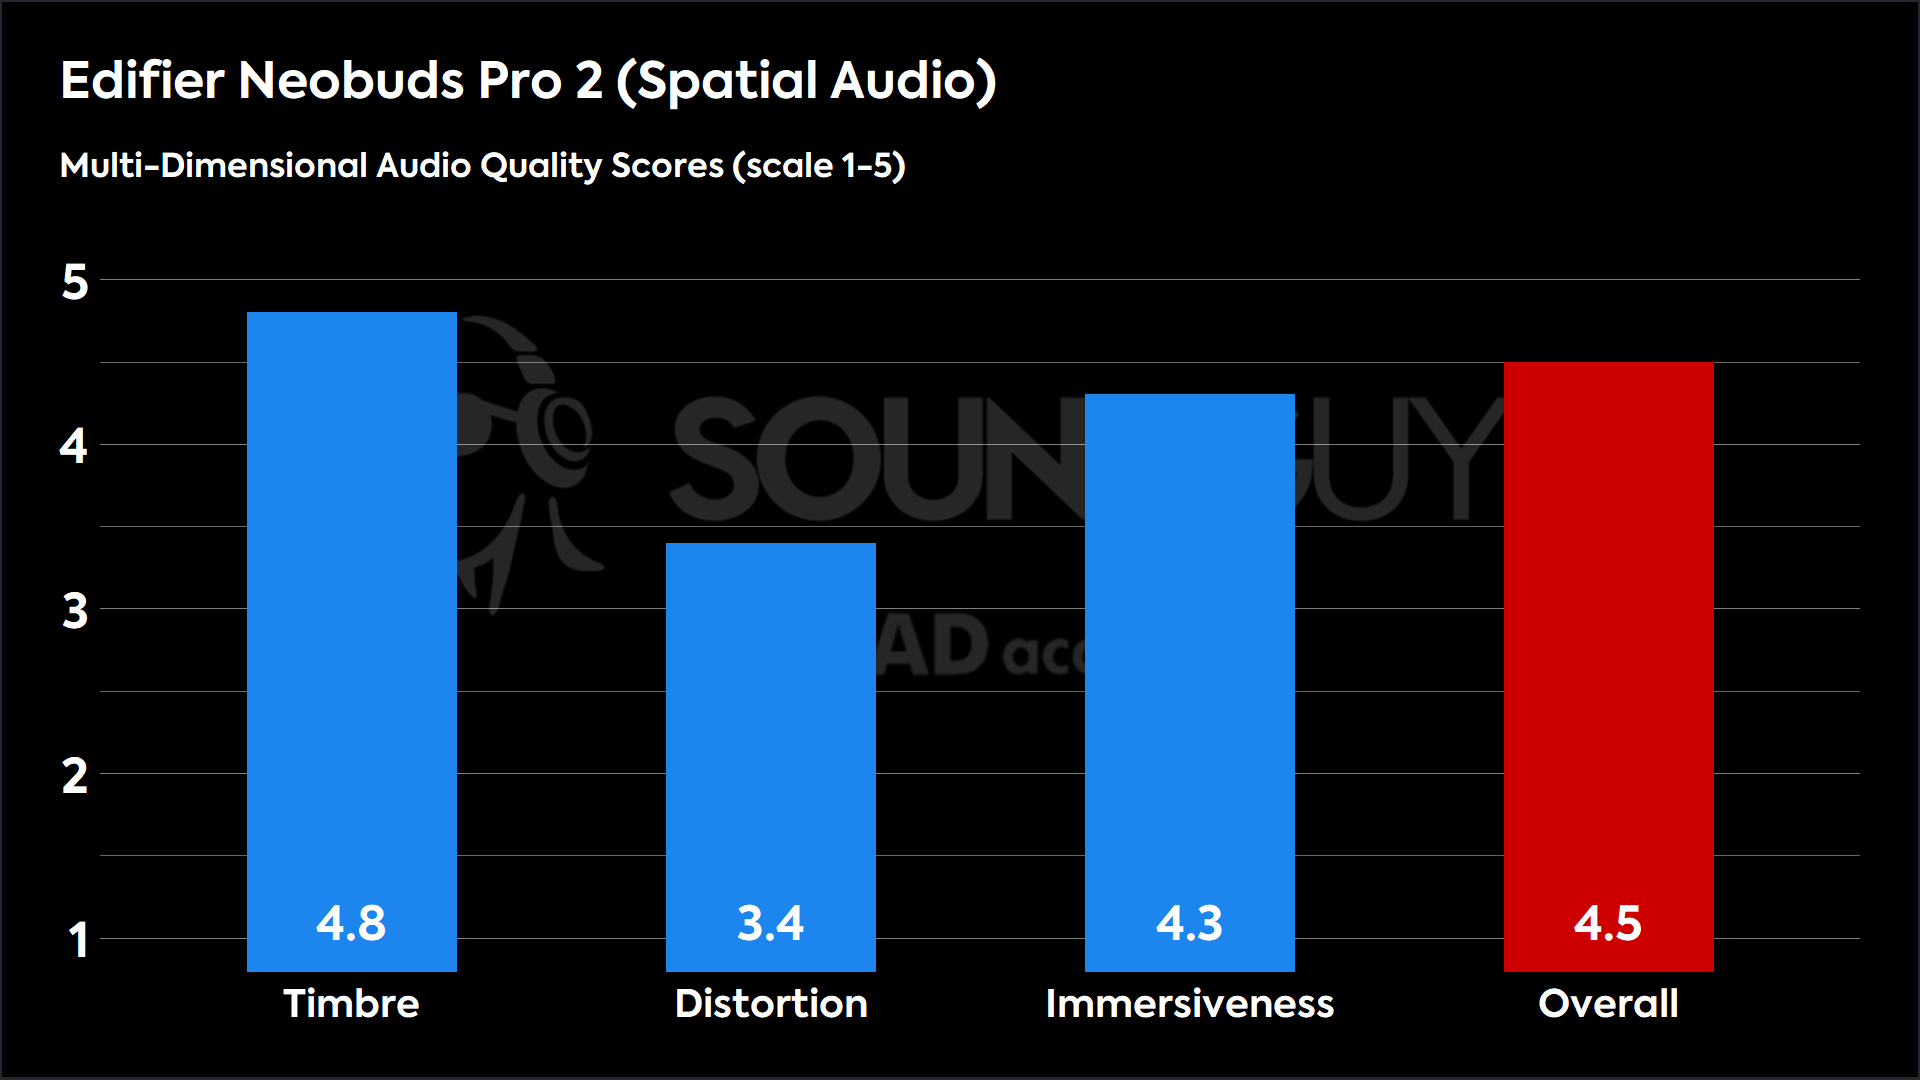 Mutli-Dimensional Audio Quality Scores for the Edifier NeoBuds 2 Pro's spatial audio mode.